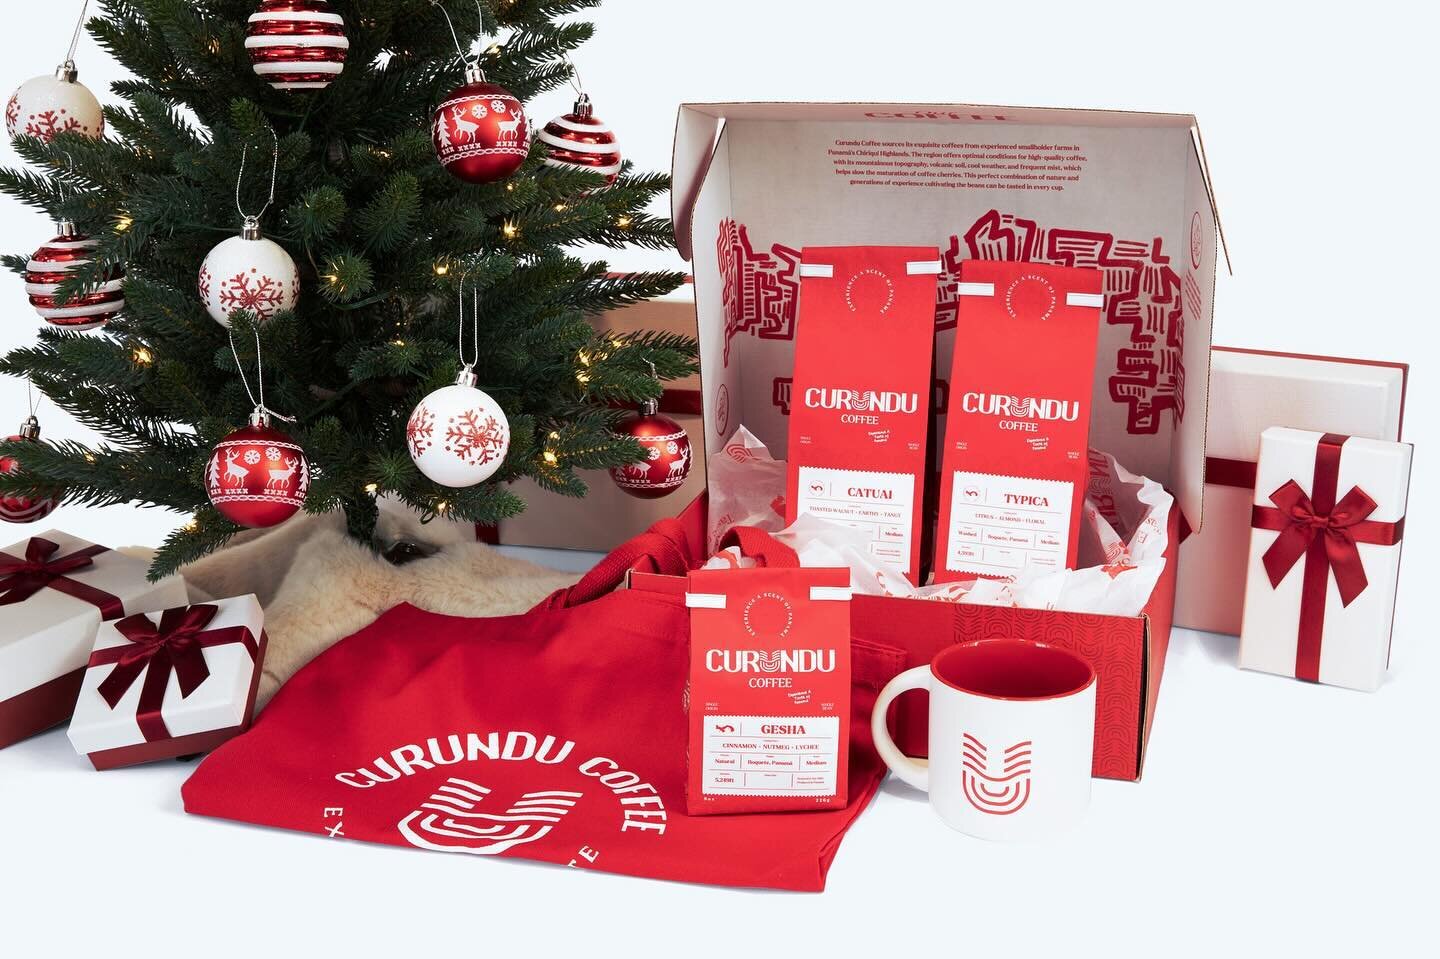 Searching for the ideal gifts for the coffee aficionados in your circle? The Curundu Coffee gift box, with either three sample packs or two of our signature coffees, will win the Holidays! Both options come with a Curundu Coffee mug and tote bag. ☕🎁